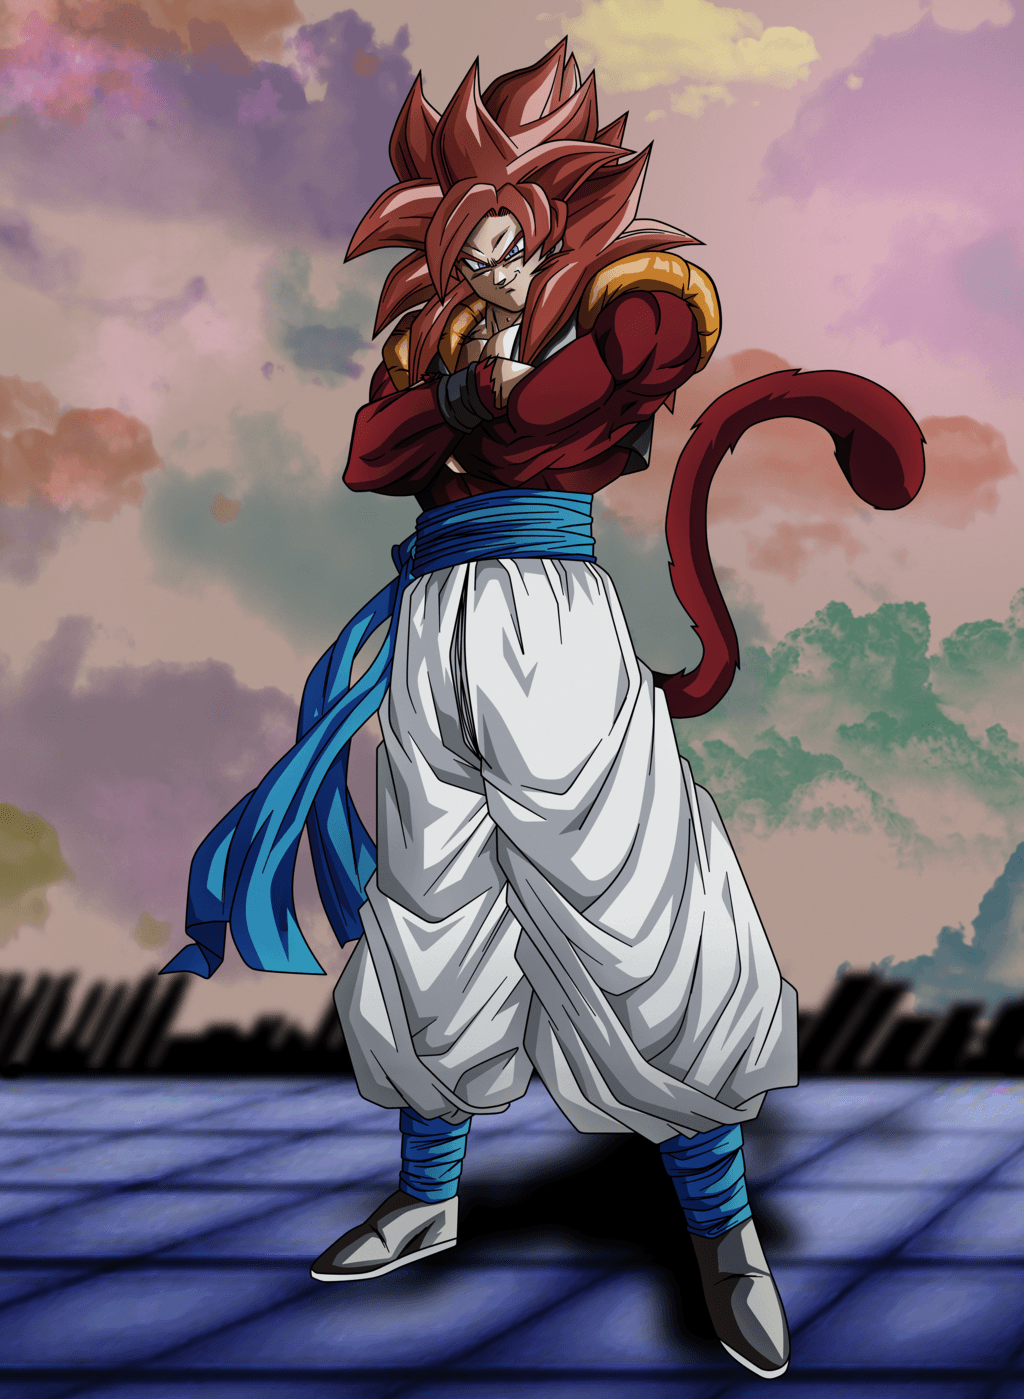 SSJ4 Gogeta Wallpaper Discover more anime Dragon Ball Dragon Ball Super  Gogeta Manga wallpaper httpswwwkolp  Wallpaper Free hd wallpapers  Stock imagery